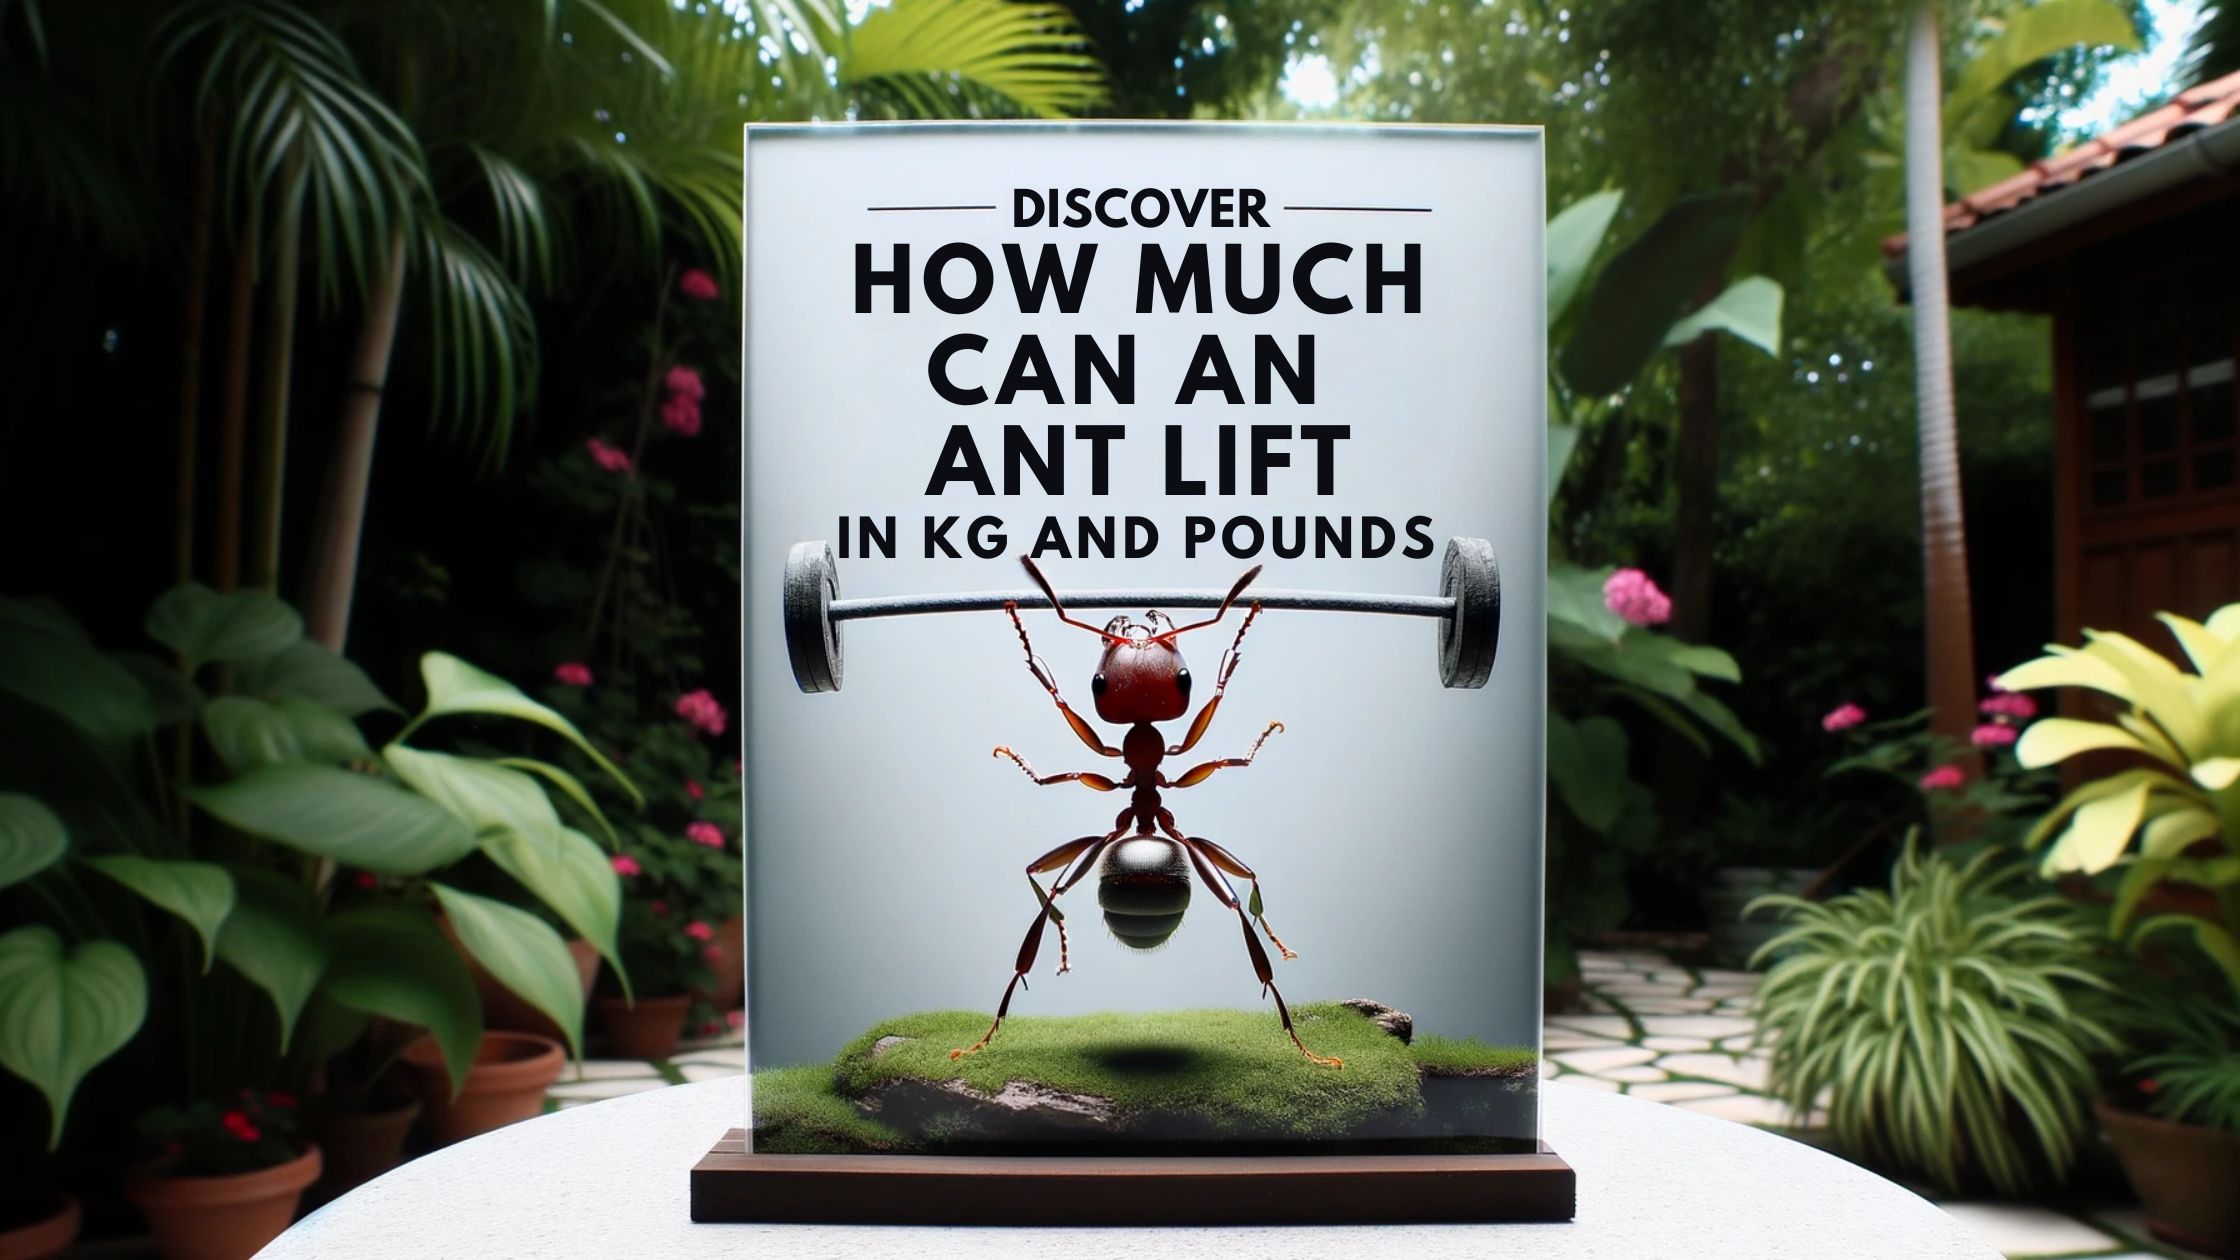 HOW MUCH CAN AN ANT LIFT IN KG AND POUNDS 